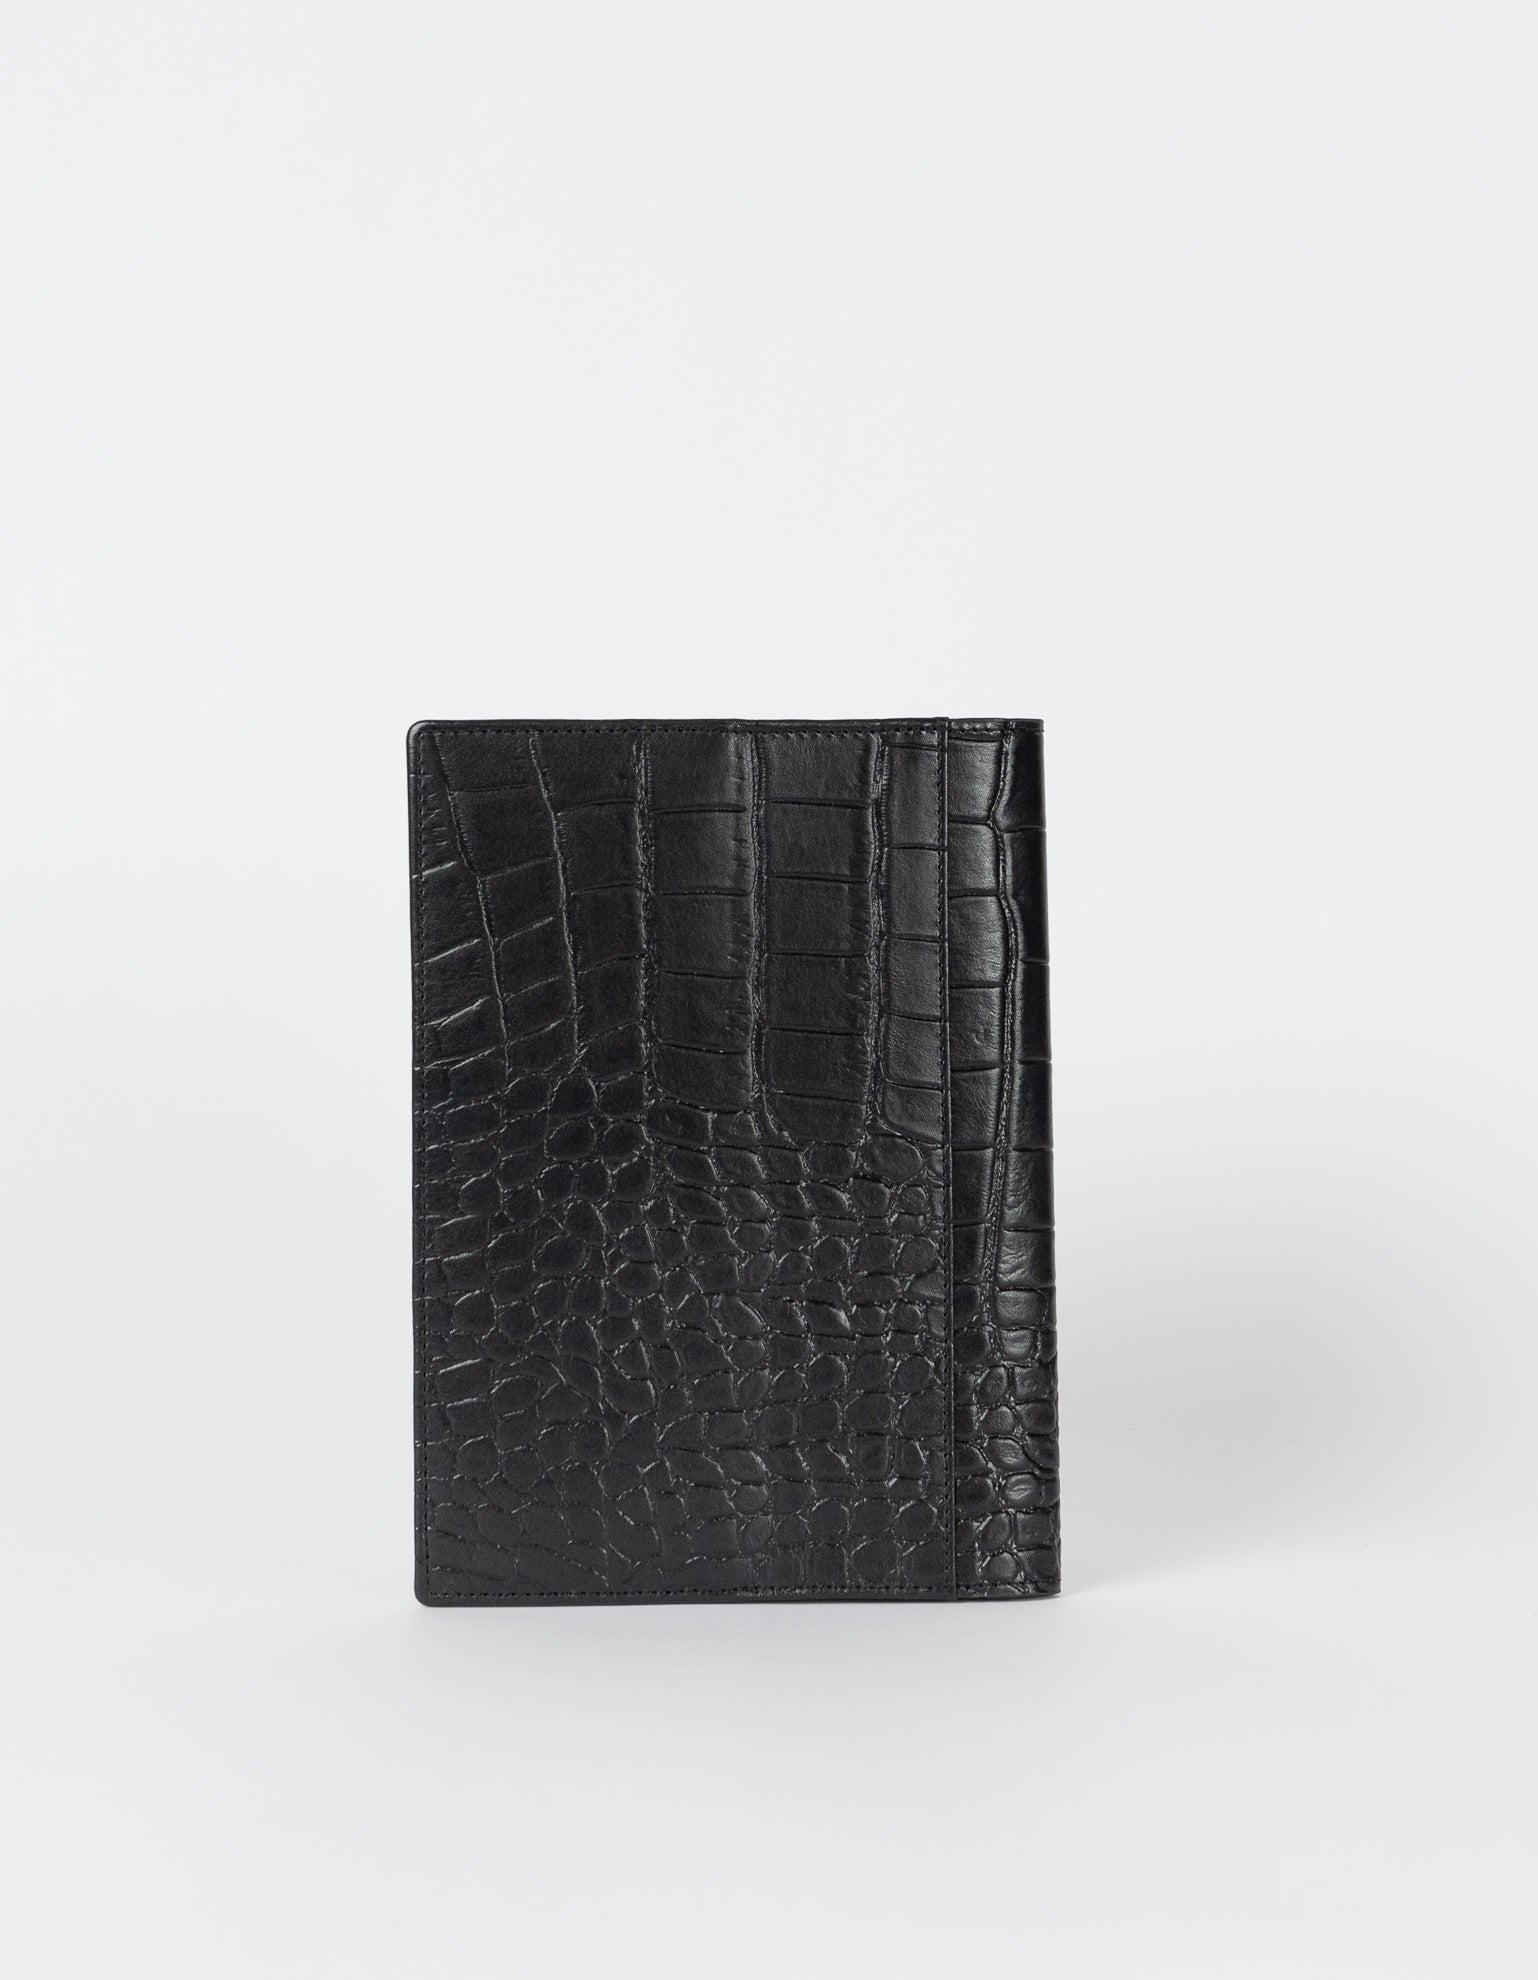 Notebook Black Croco Classic Leather. Medium sized notepad cover. Back product image.